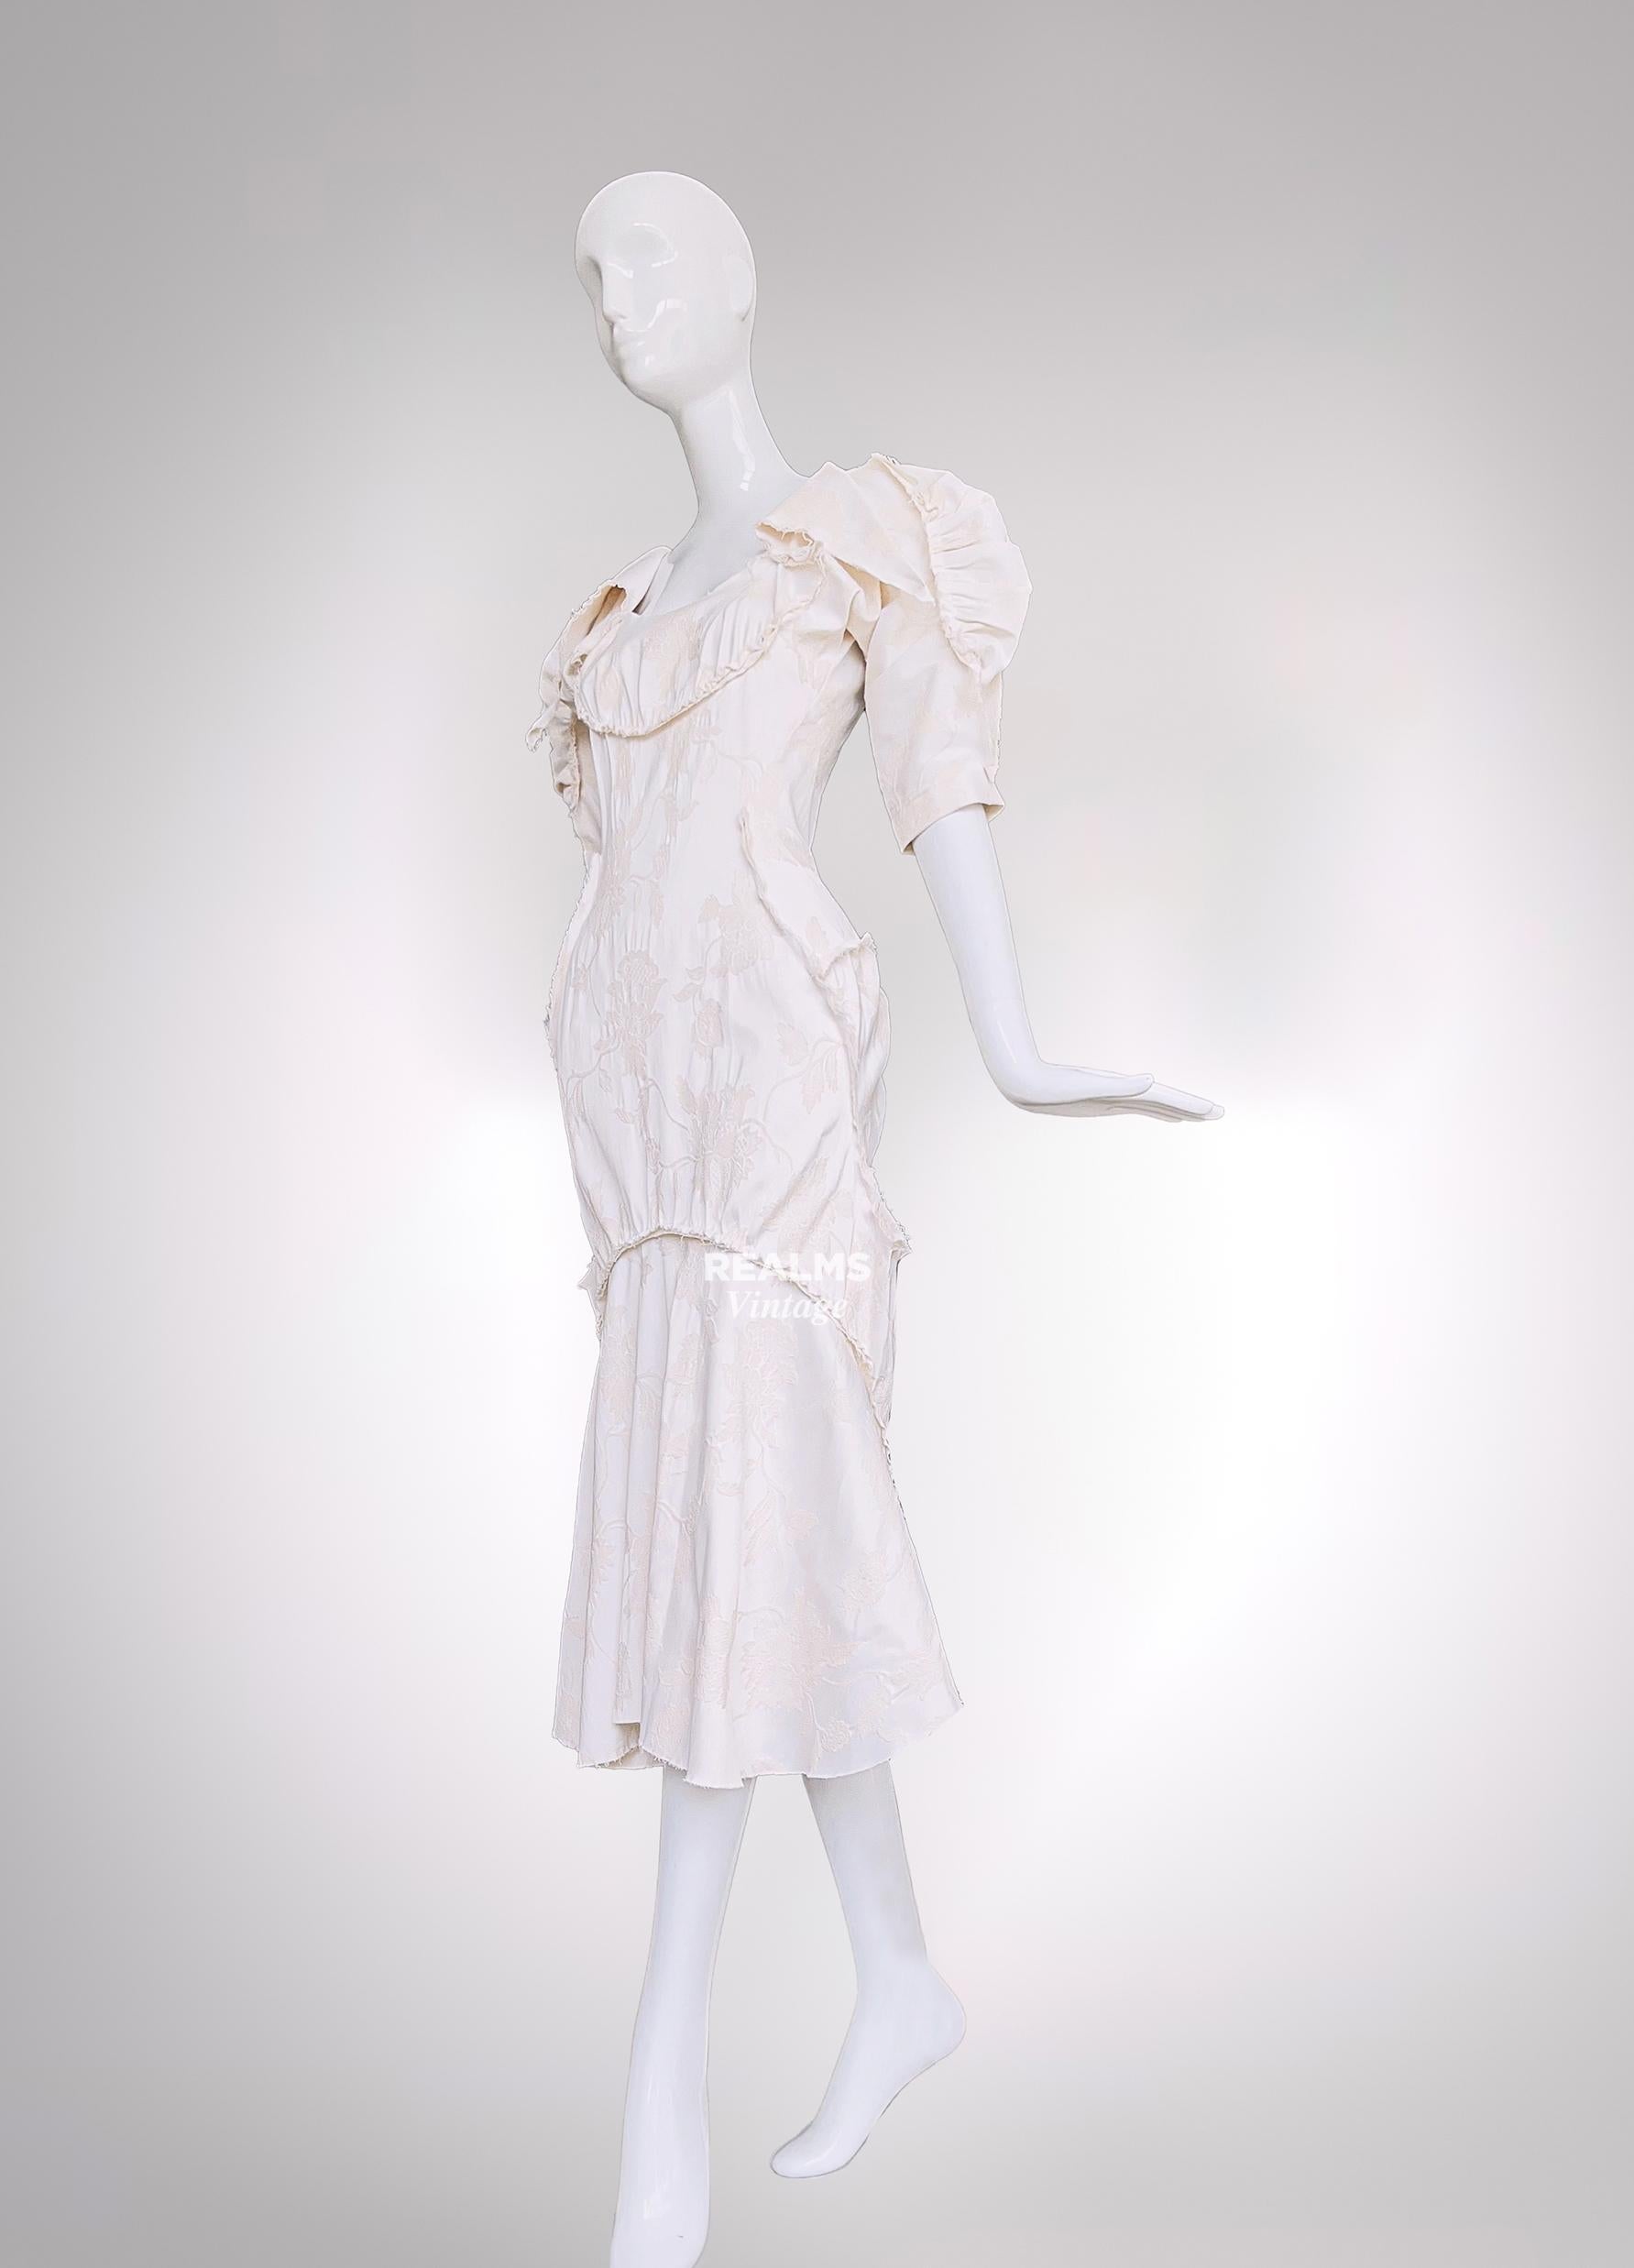 Vivienne Westwood SS 2020 Dress
New, unworn

Cut from beautiful flower jacquard fabric, tailored with voluminous elements and frayed gathered seams for a patchwork effect. The cotton-blend Cocoon Dress is inspired by colours, patterns and volume of